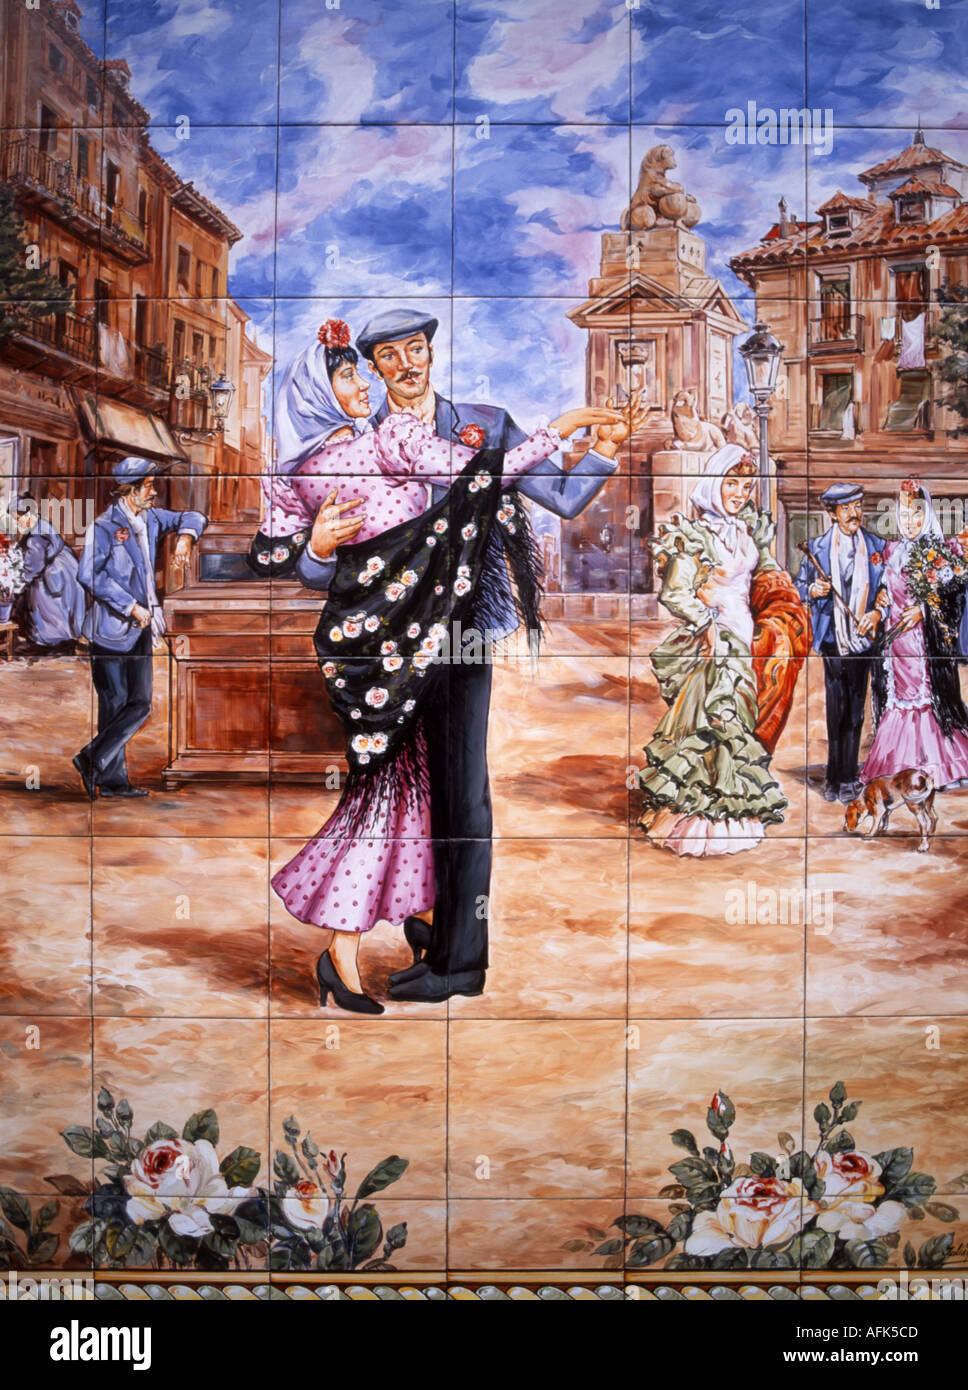 Madrid, Spain. Tiled Decoration outside El Madrono restaurant. Man and Woman dancing in traditional Madrid costume Stock Photo